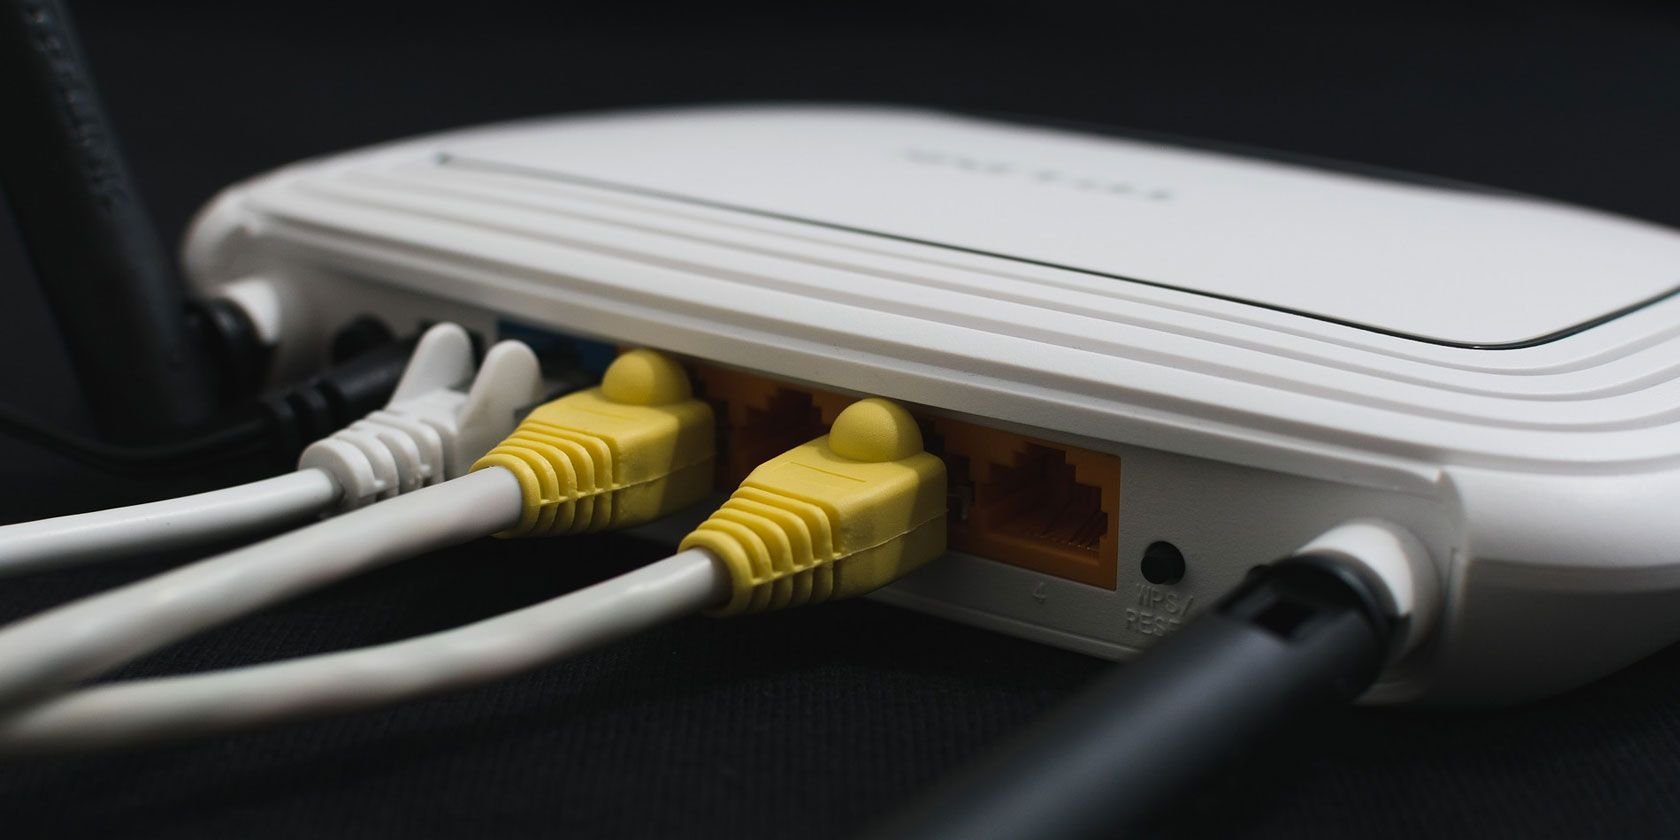 12 Useful Ways to Reuse an Old Router (Don't Throw It Away!)